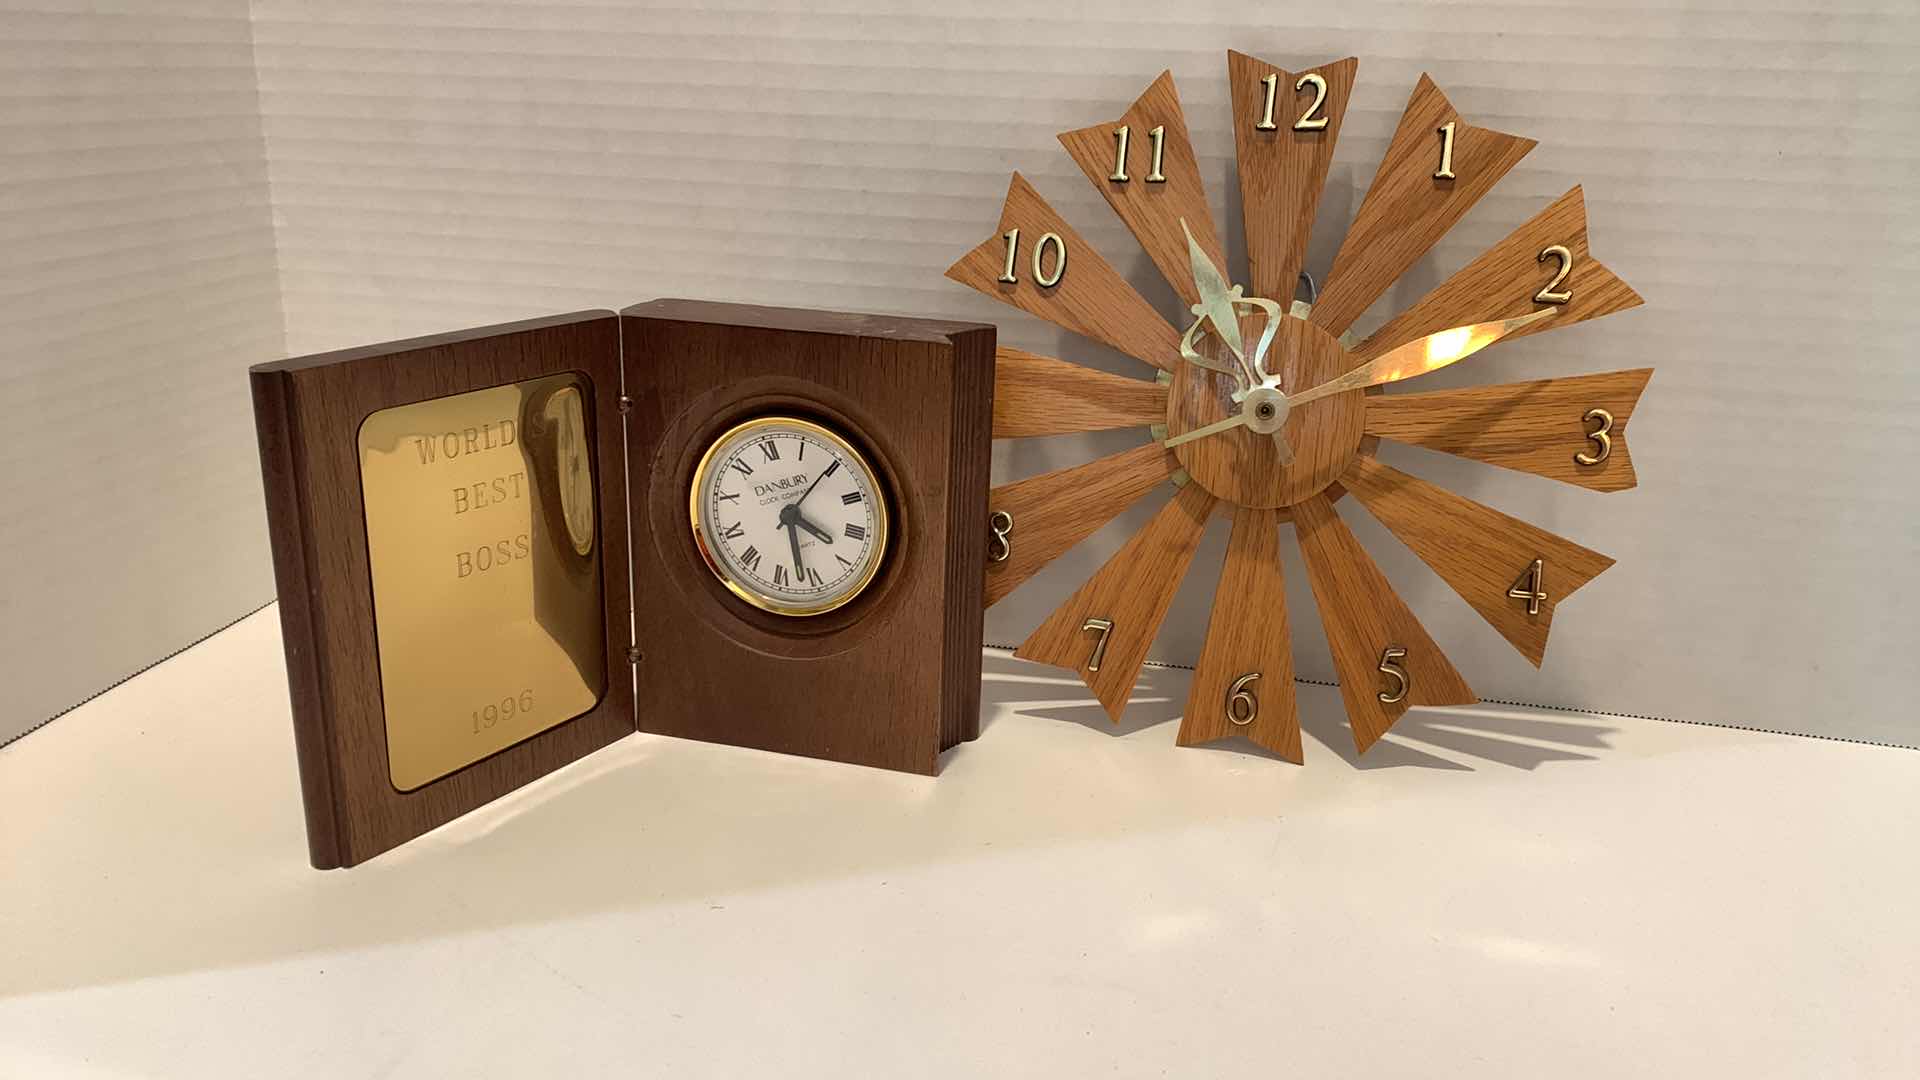 Photo 1 of 2 WOOD TABLE AND WALL CLOCKS